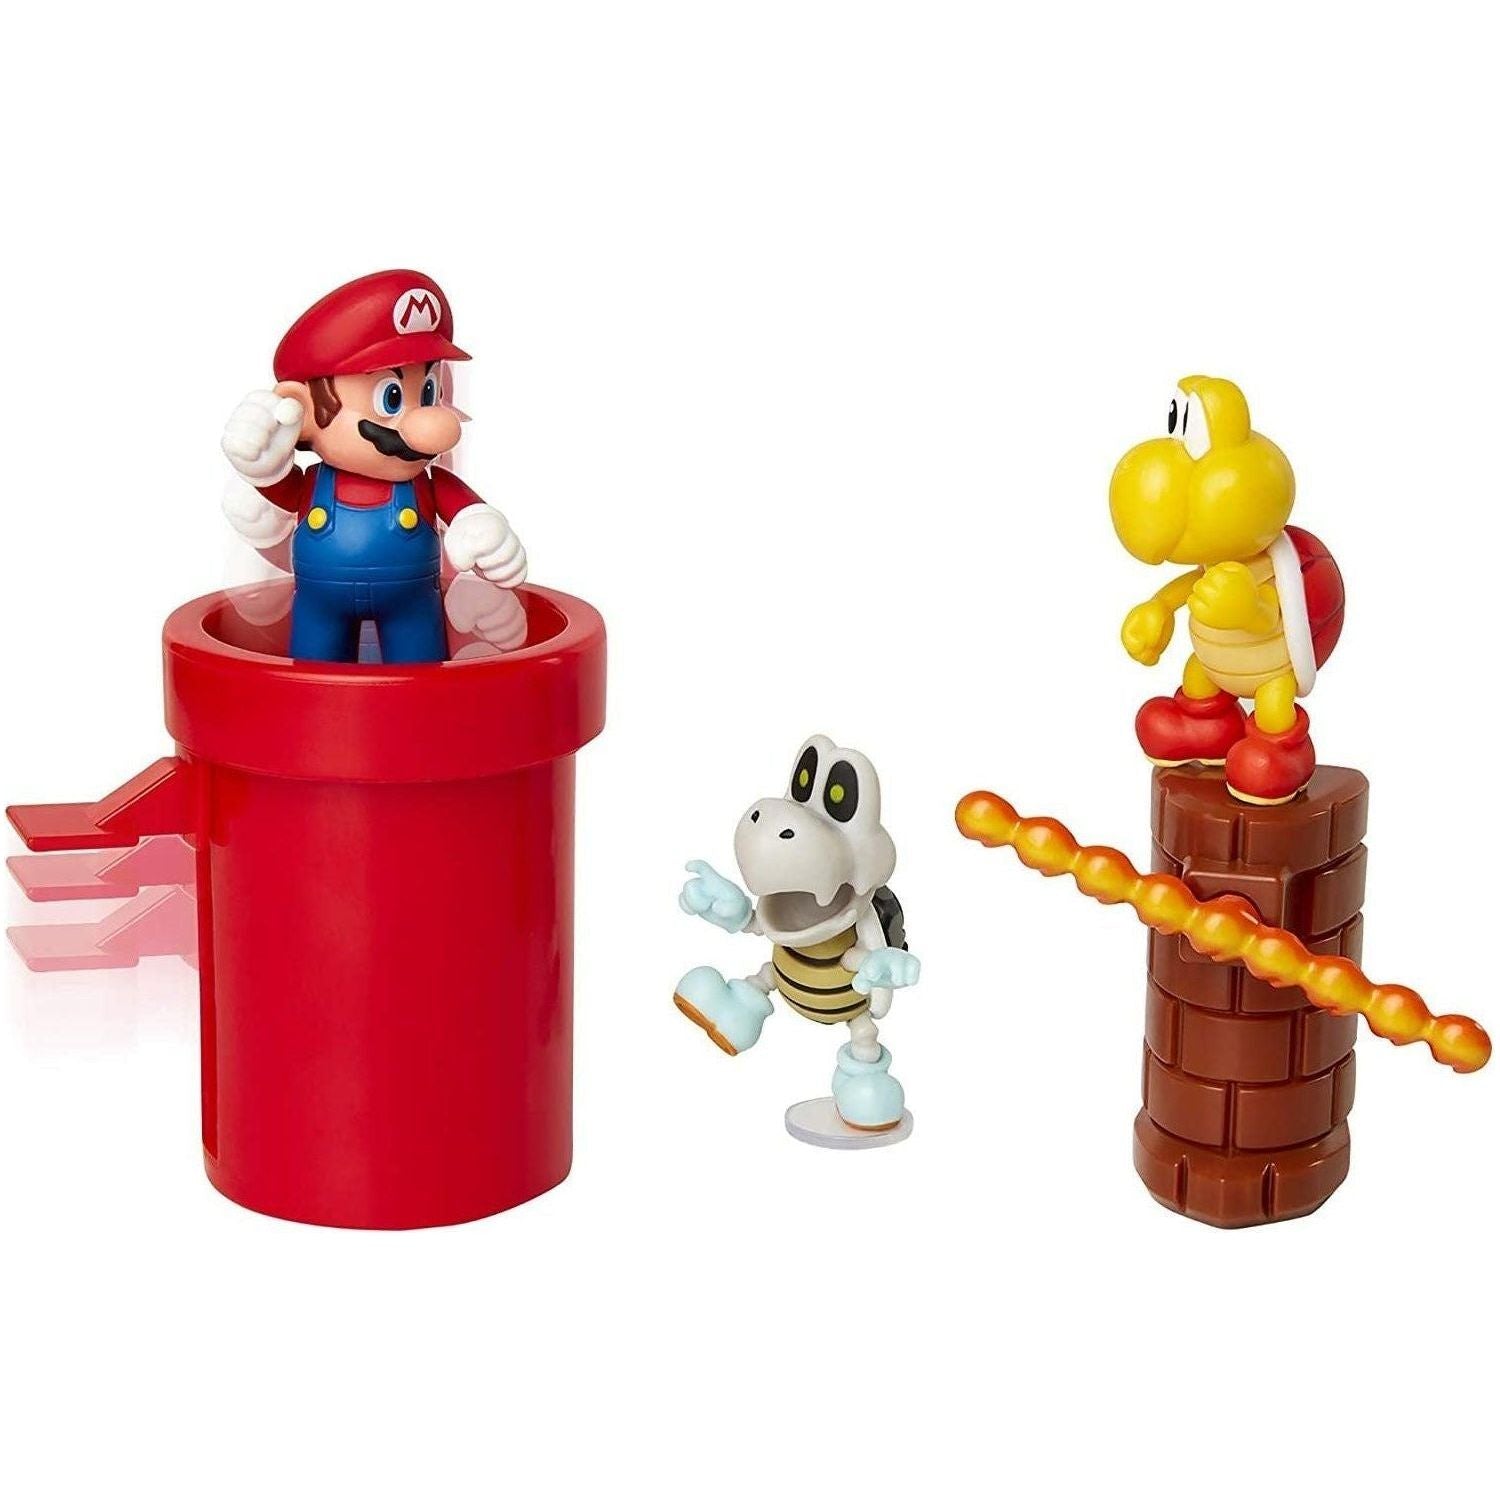 SUPER MARIO Nintendo Dungeon 2.5” Figure Multipack Diorama Set with Accessories - BumbleToys - 4+ Years, 5-7 Years, Boys, LEGO, OXE, Pre-Order, Super Mario